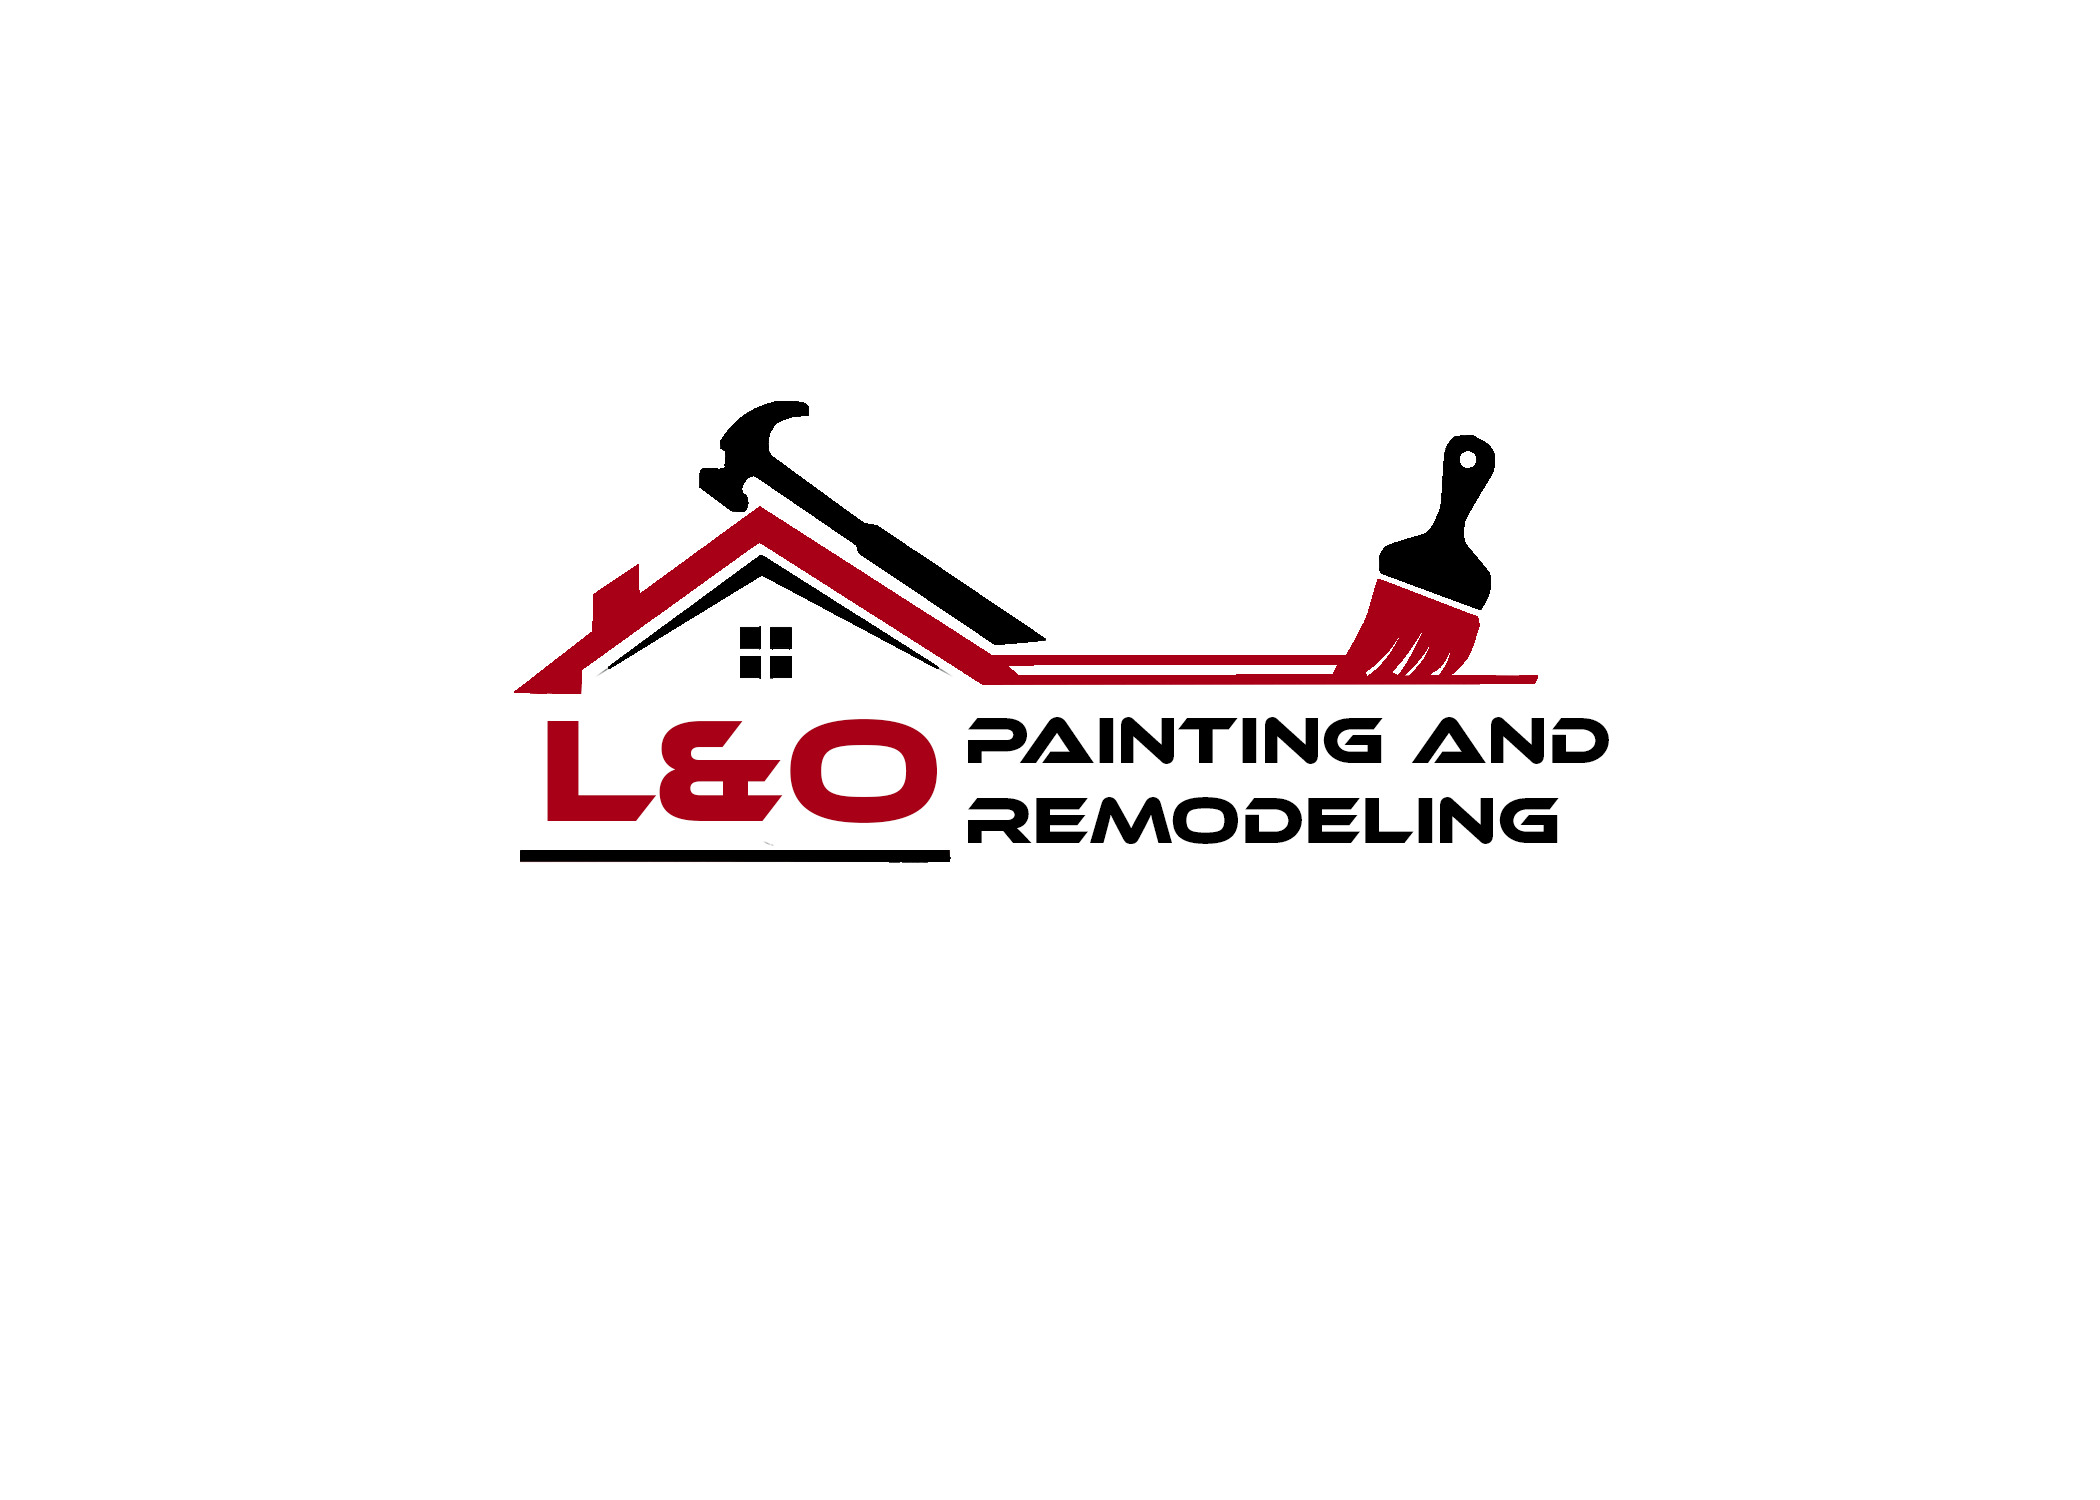 L&O Painting and Remodeling Logo